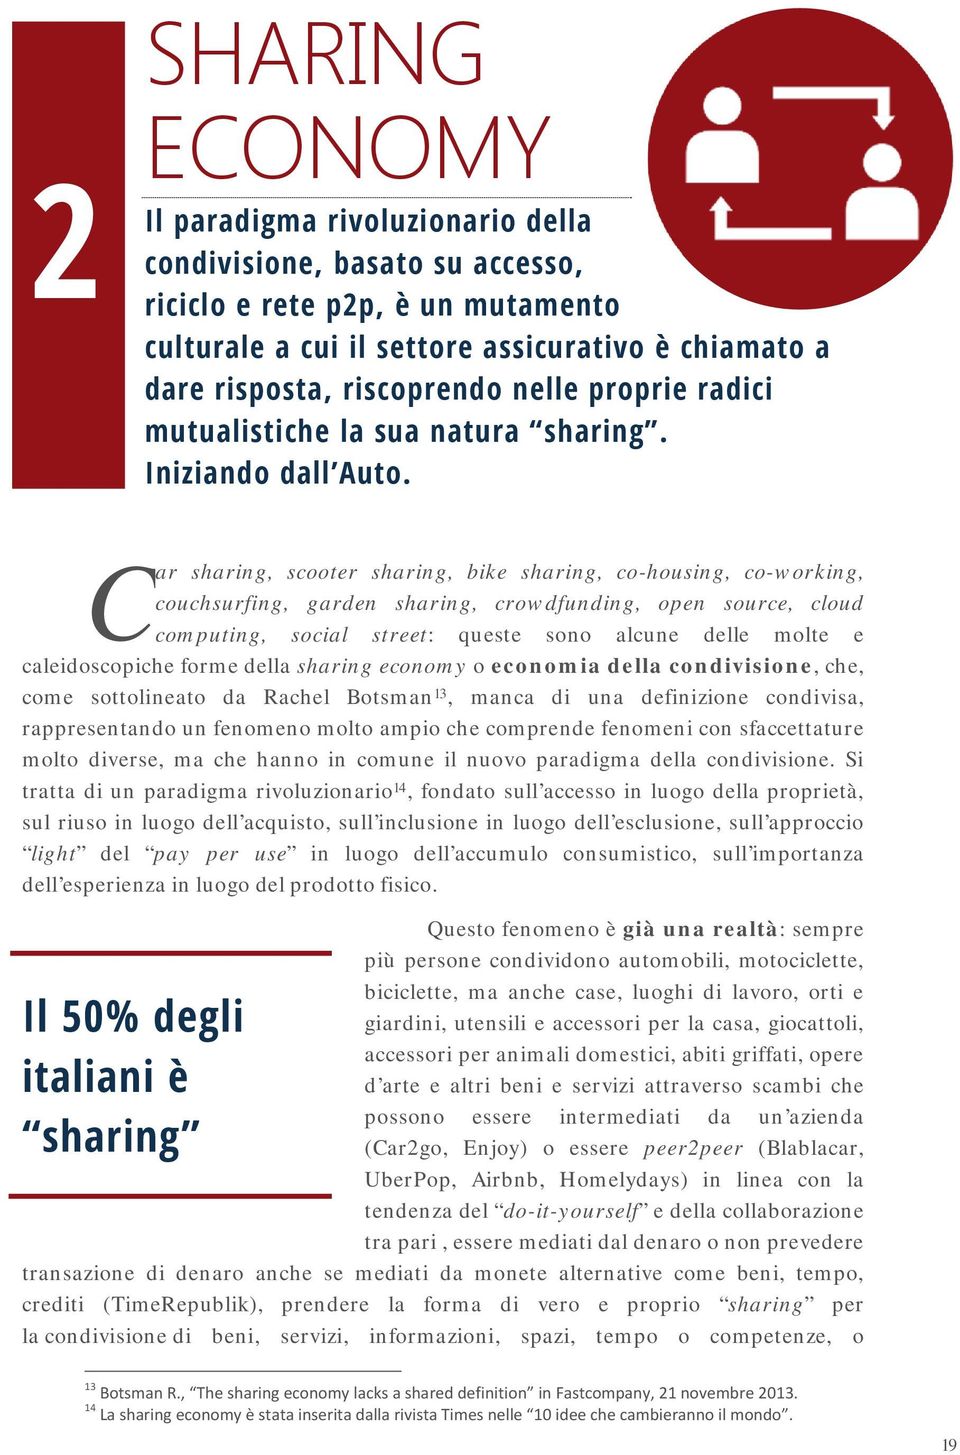 Car sharing, scooter sharing, bike sharing, co-housing, co-working, couchsurfing, garden sharing, crowdfunding, open source, cloud computing, social street: queste sono alcune delle molte e